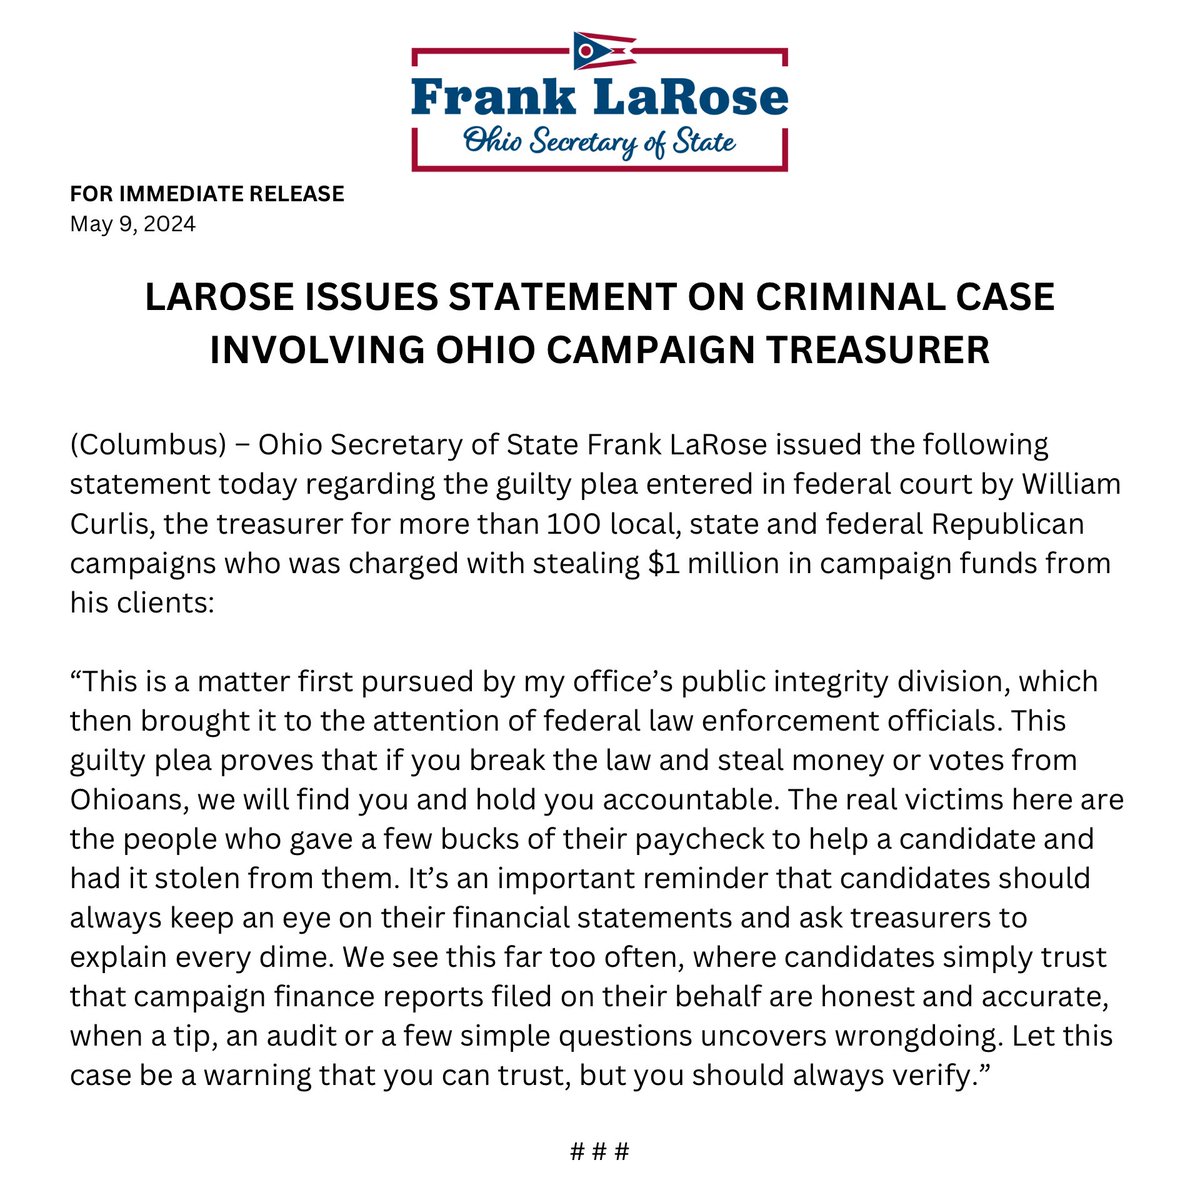 My statement on the new developments in the criminal case involving an Ohio campaign treasurer and the incredible work by our Public Integrity Division.